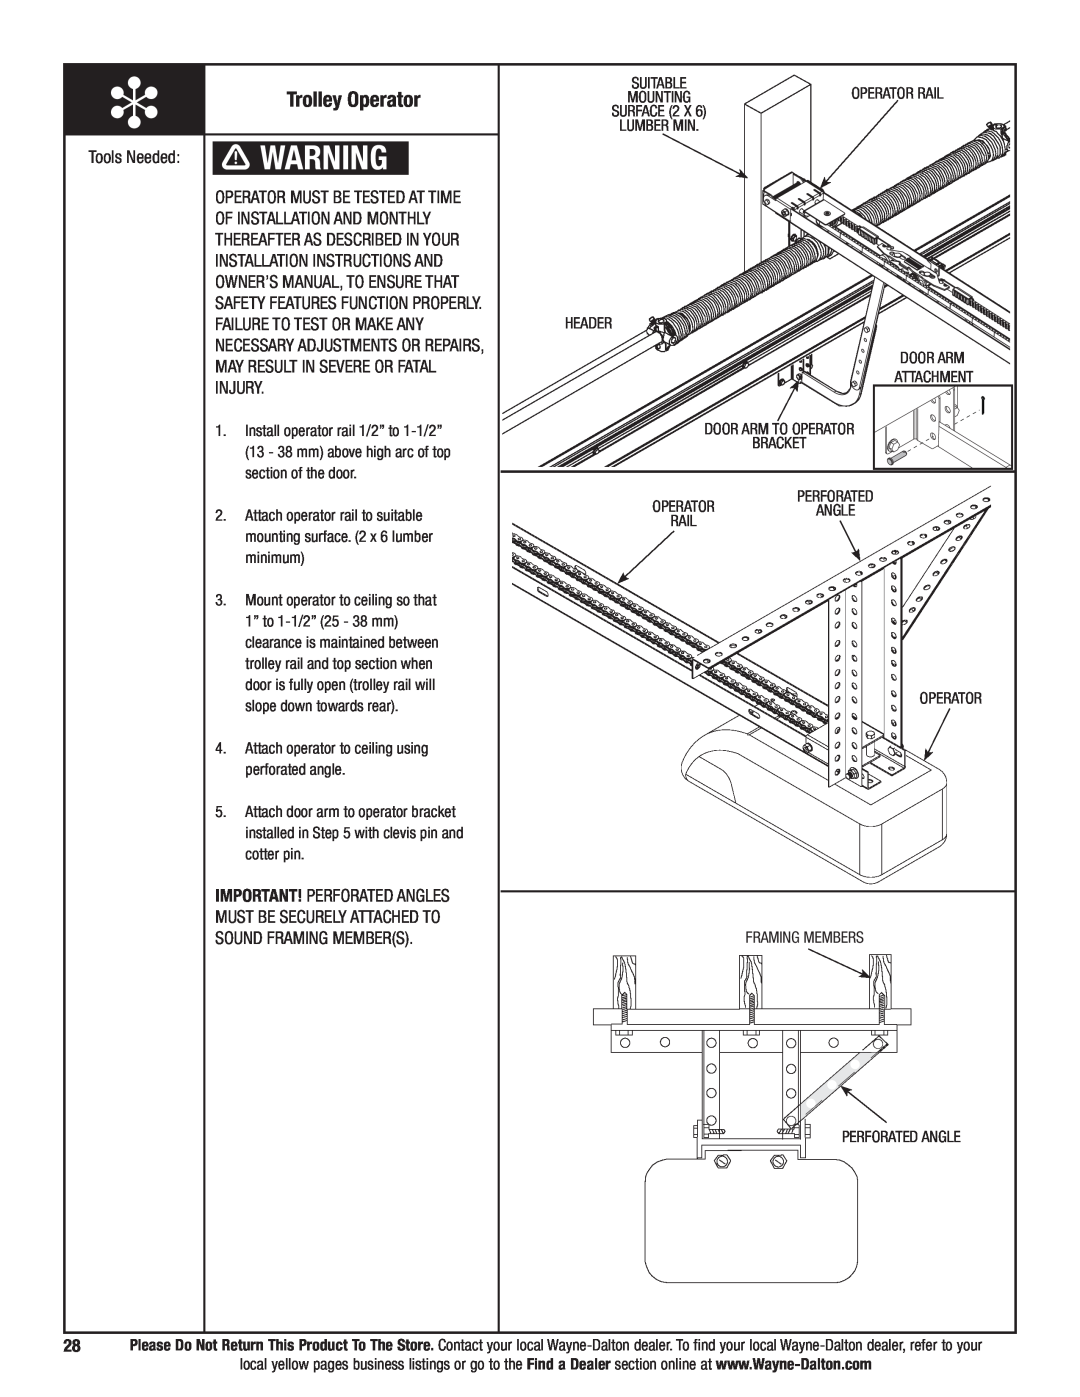 Wayne-Dalton 9700 installation instructions Trolley Operator, Operator Must Be Tested At Time, Of Installation And Monthly 